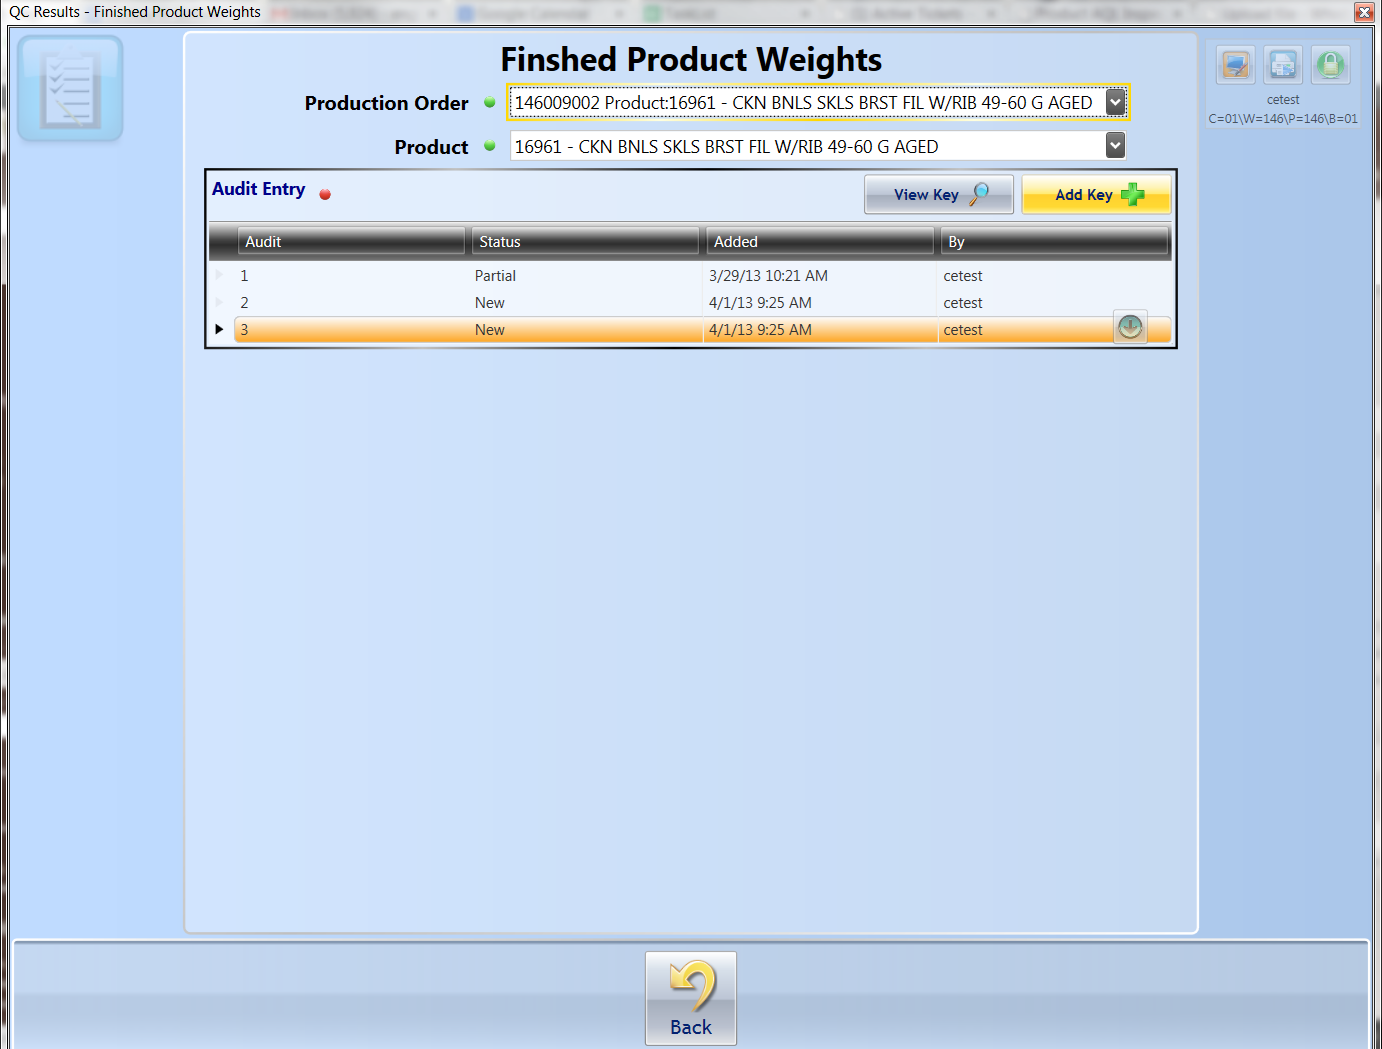 File:FinishedProductWeights SPC header addKey 1.png